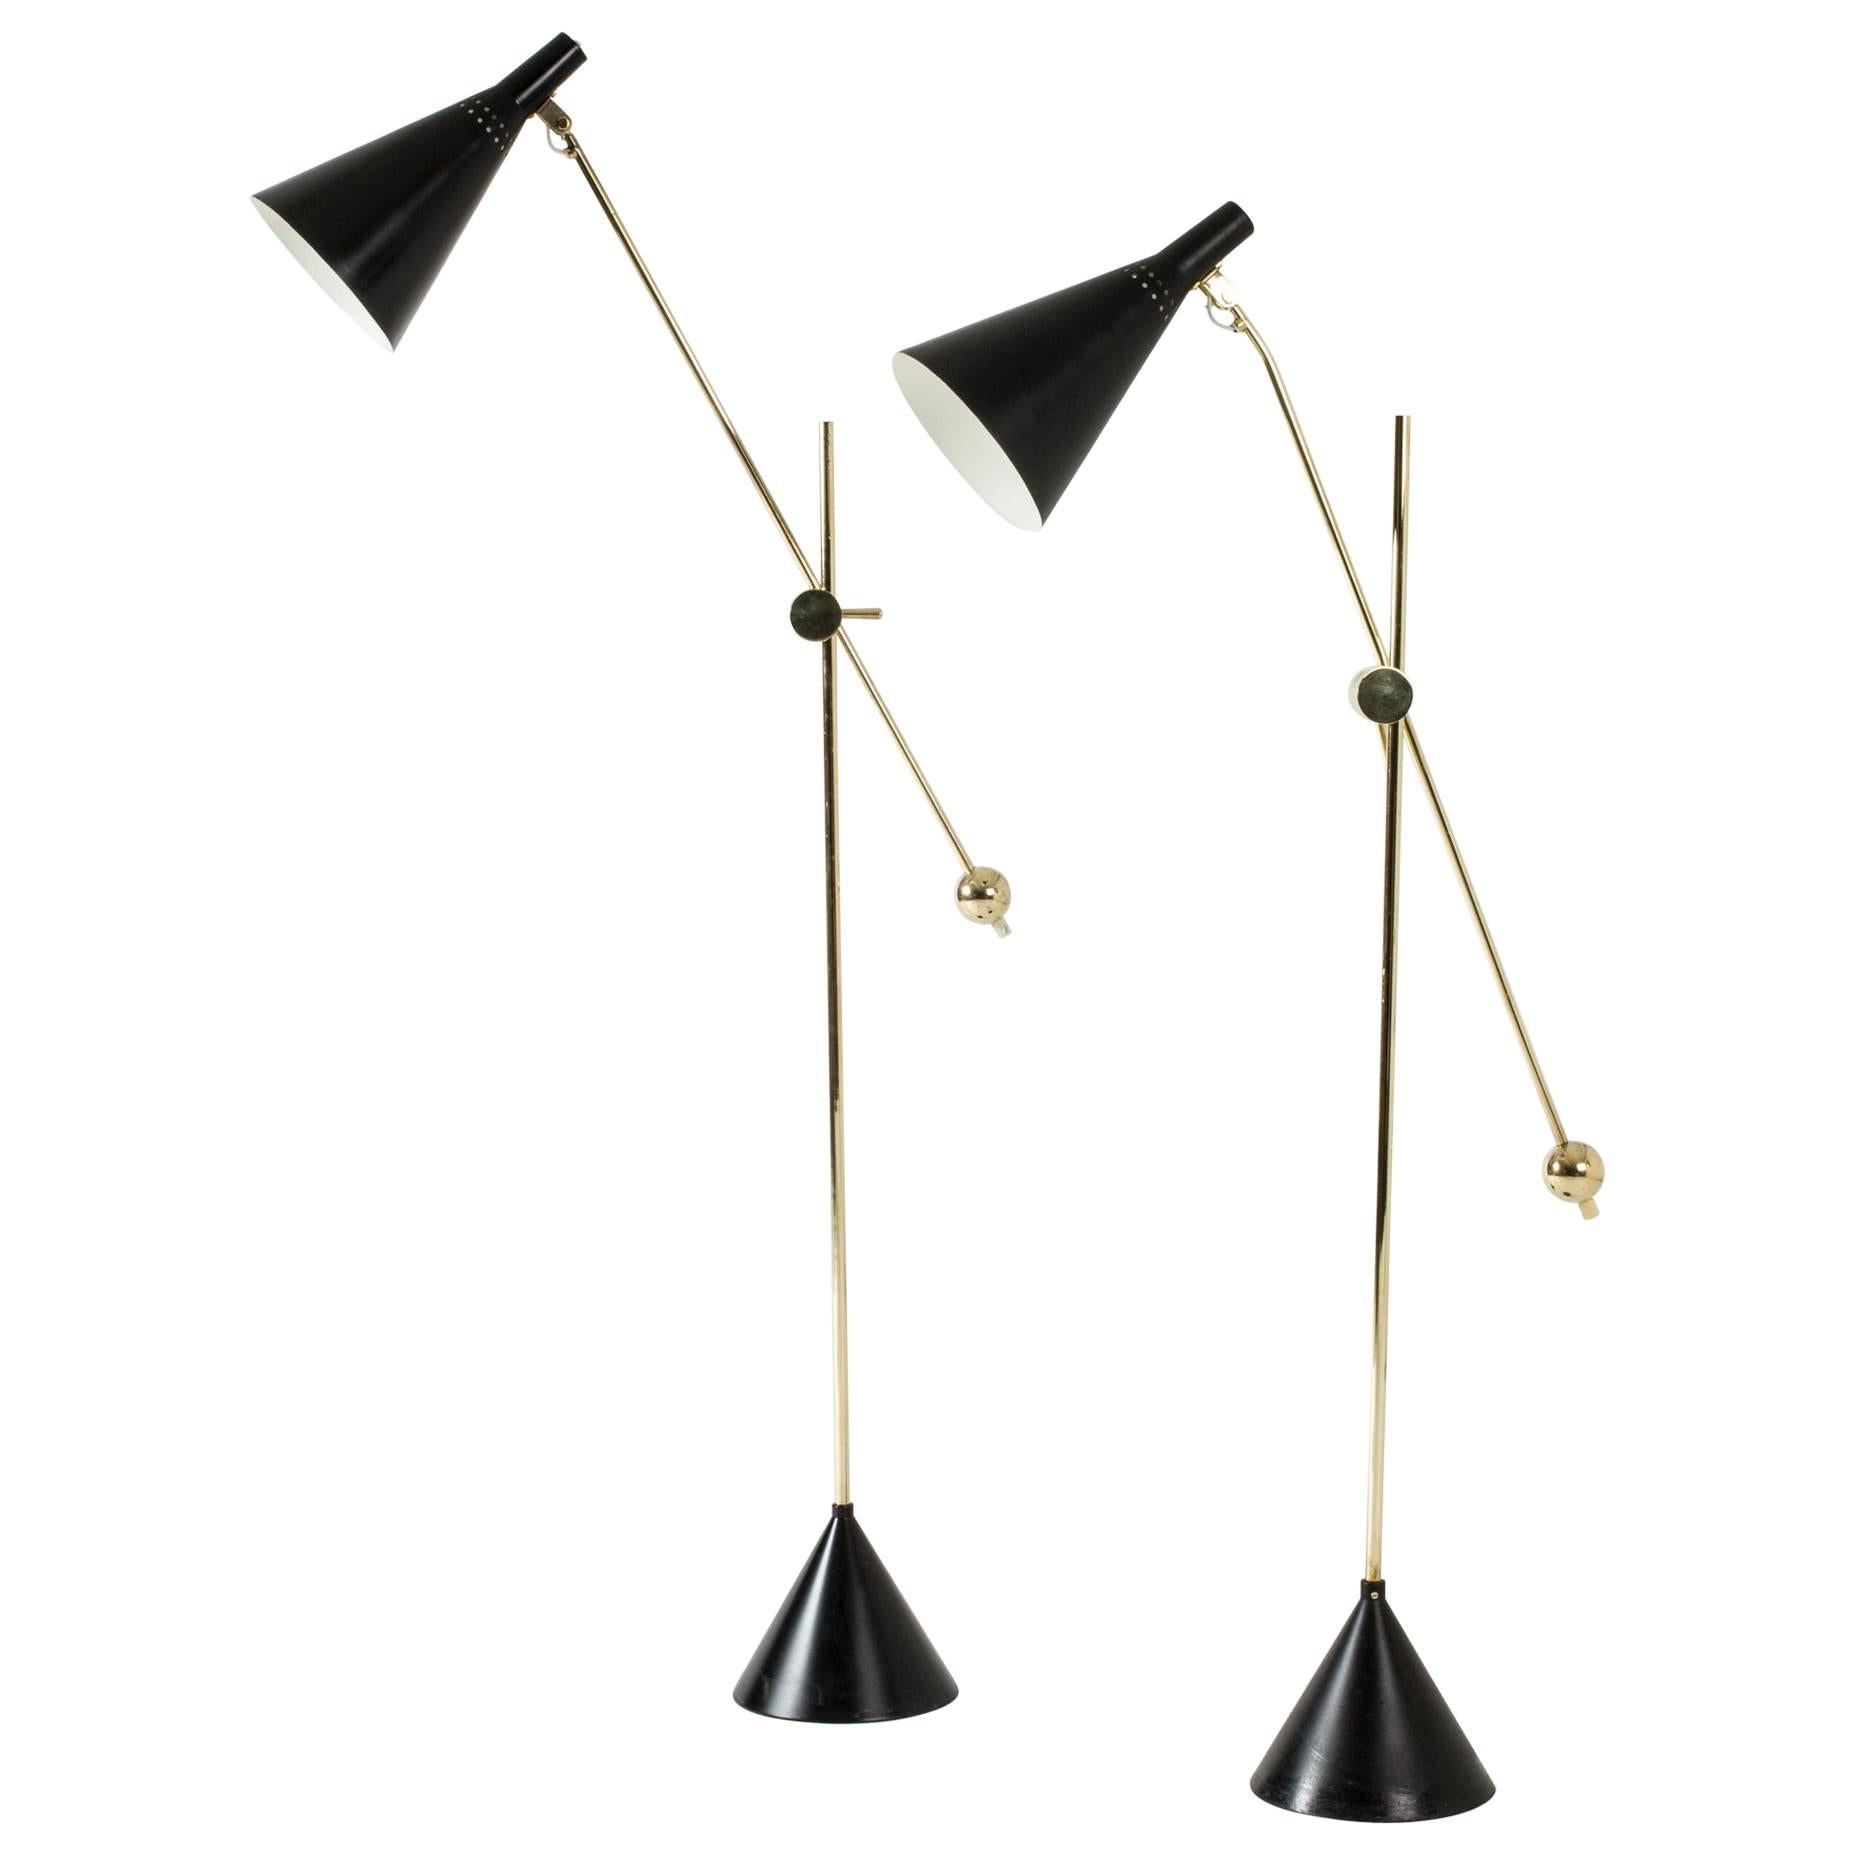 Pair of Lacquered Metal and Brass Floor Lamps by Tapio Wirkkala for Idman Oy